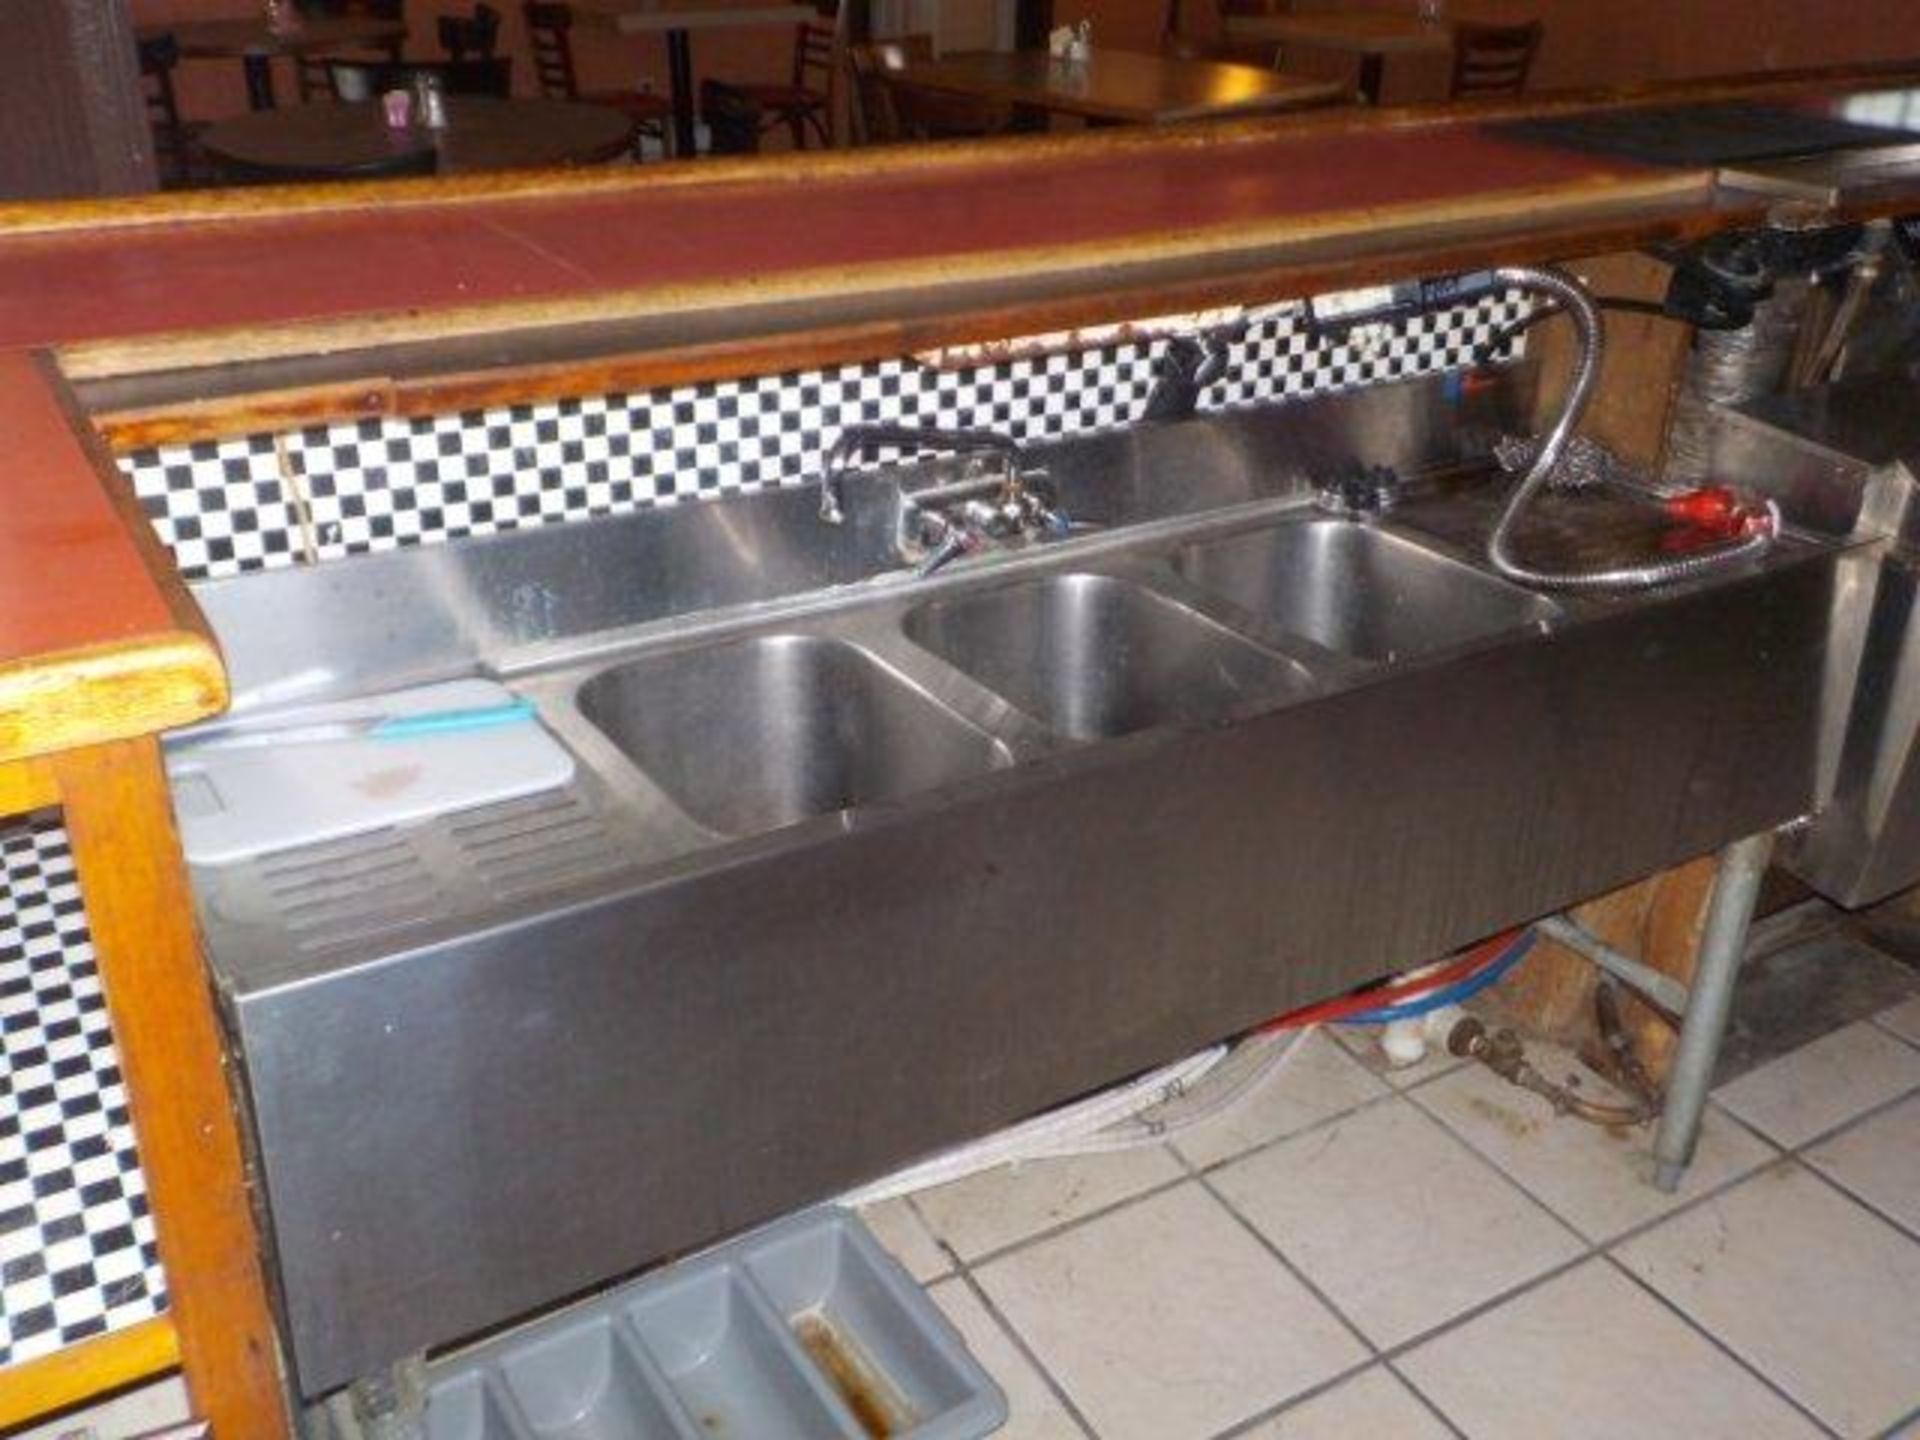 BULK BID: The Real Estate & Restaurant Equipment/Fixtures as a Whole. Lots 1 & 2. - Image 8 of 32